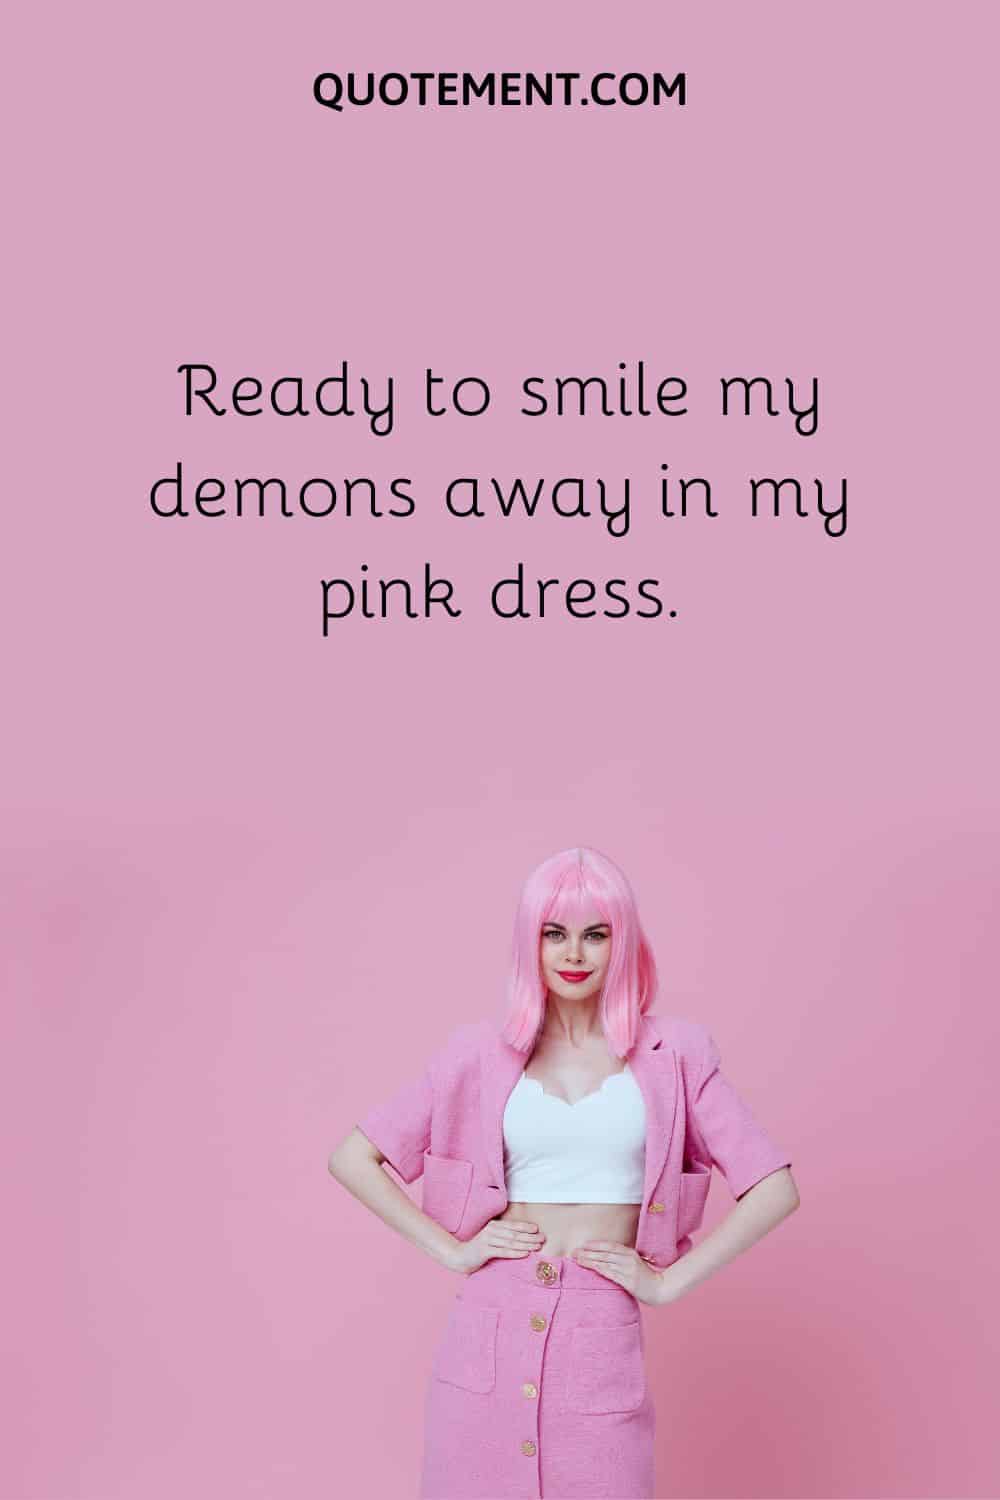 Ready to smile my demons away in my pink dress.
